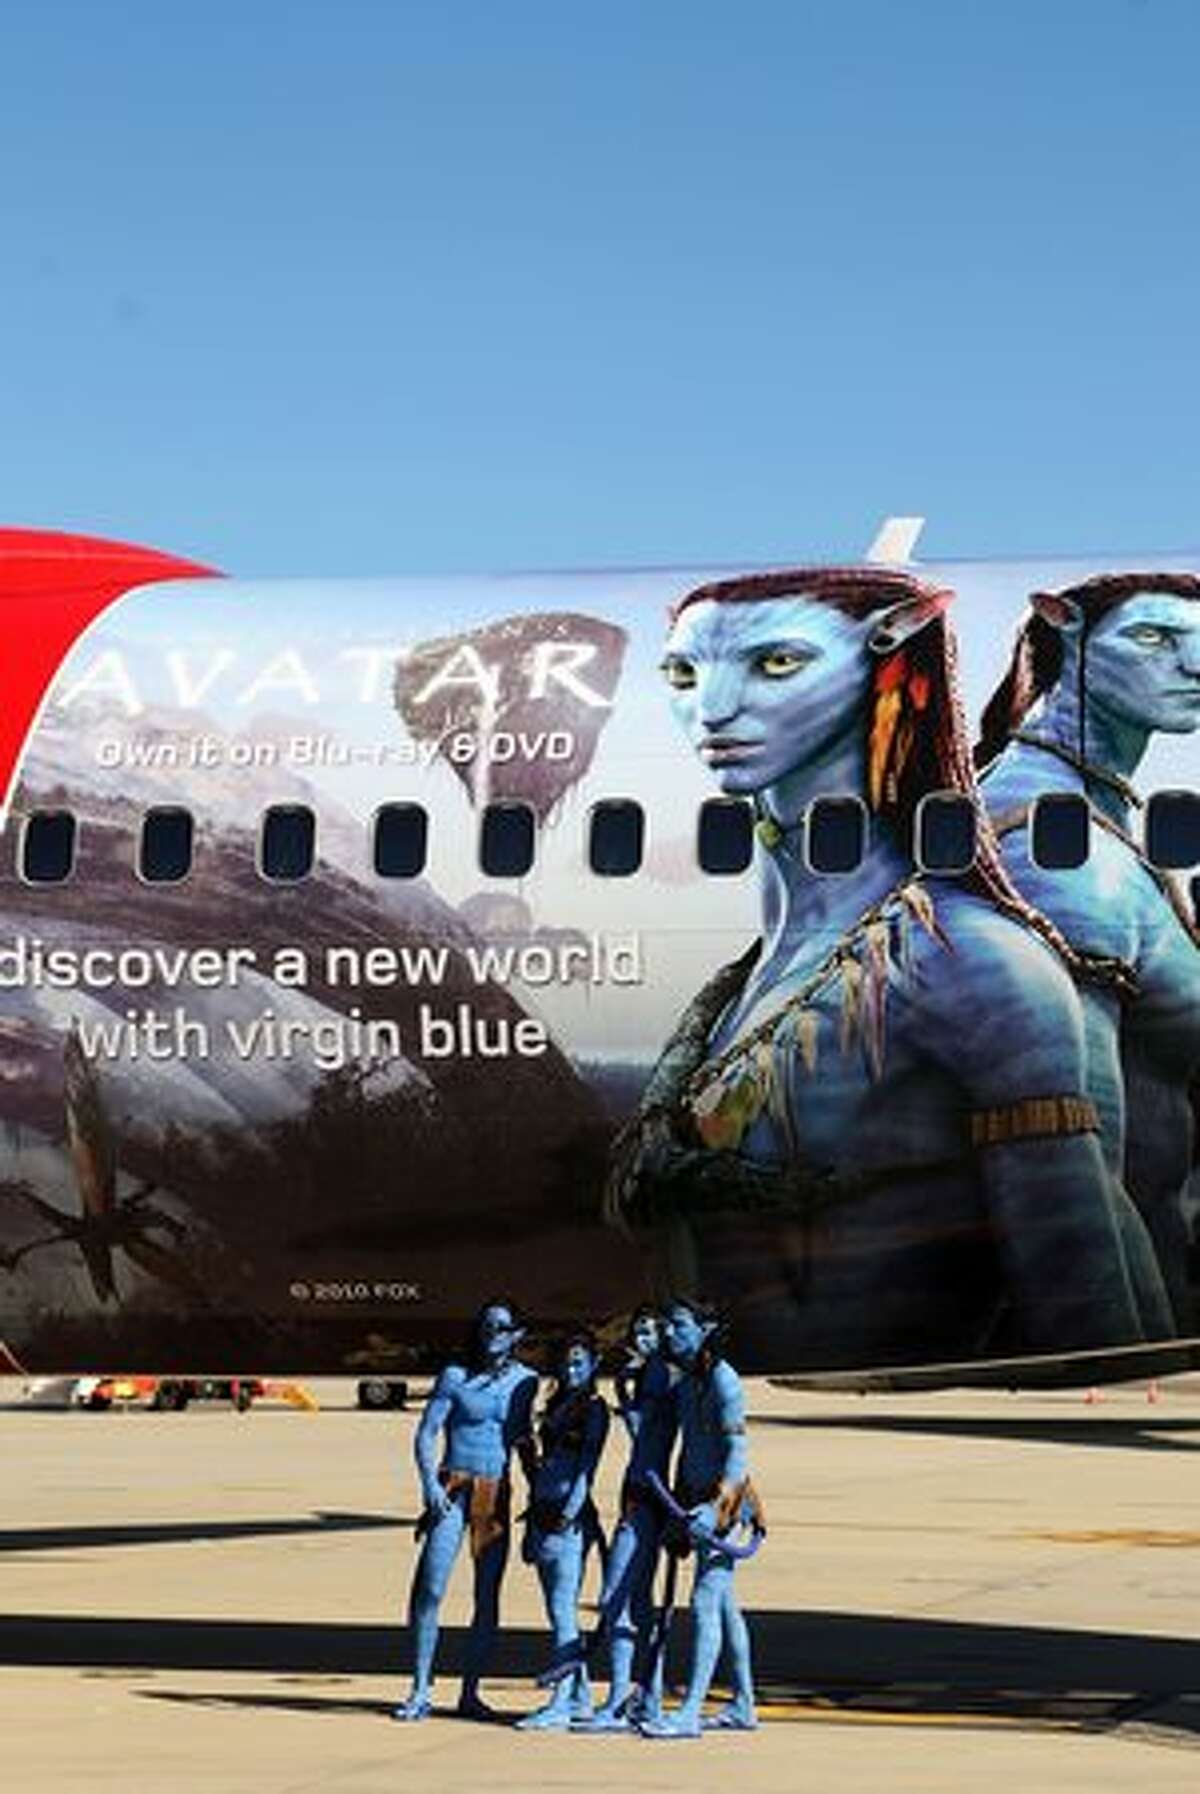 Models dressed up as characters from the film "Avatar" pose in front of an Avatar-themed Virgin Blue Boeing 737 during the launch of "Avatar" Blu-ray and DVD at Sydney Domestic Airport, in Sydney, Australia.